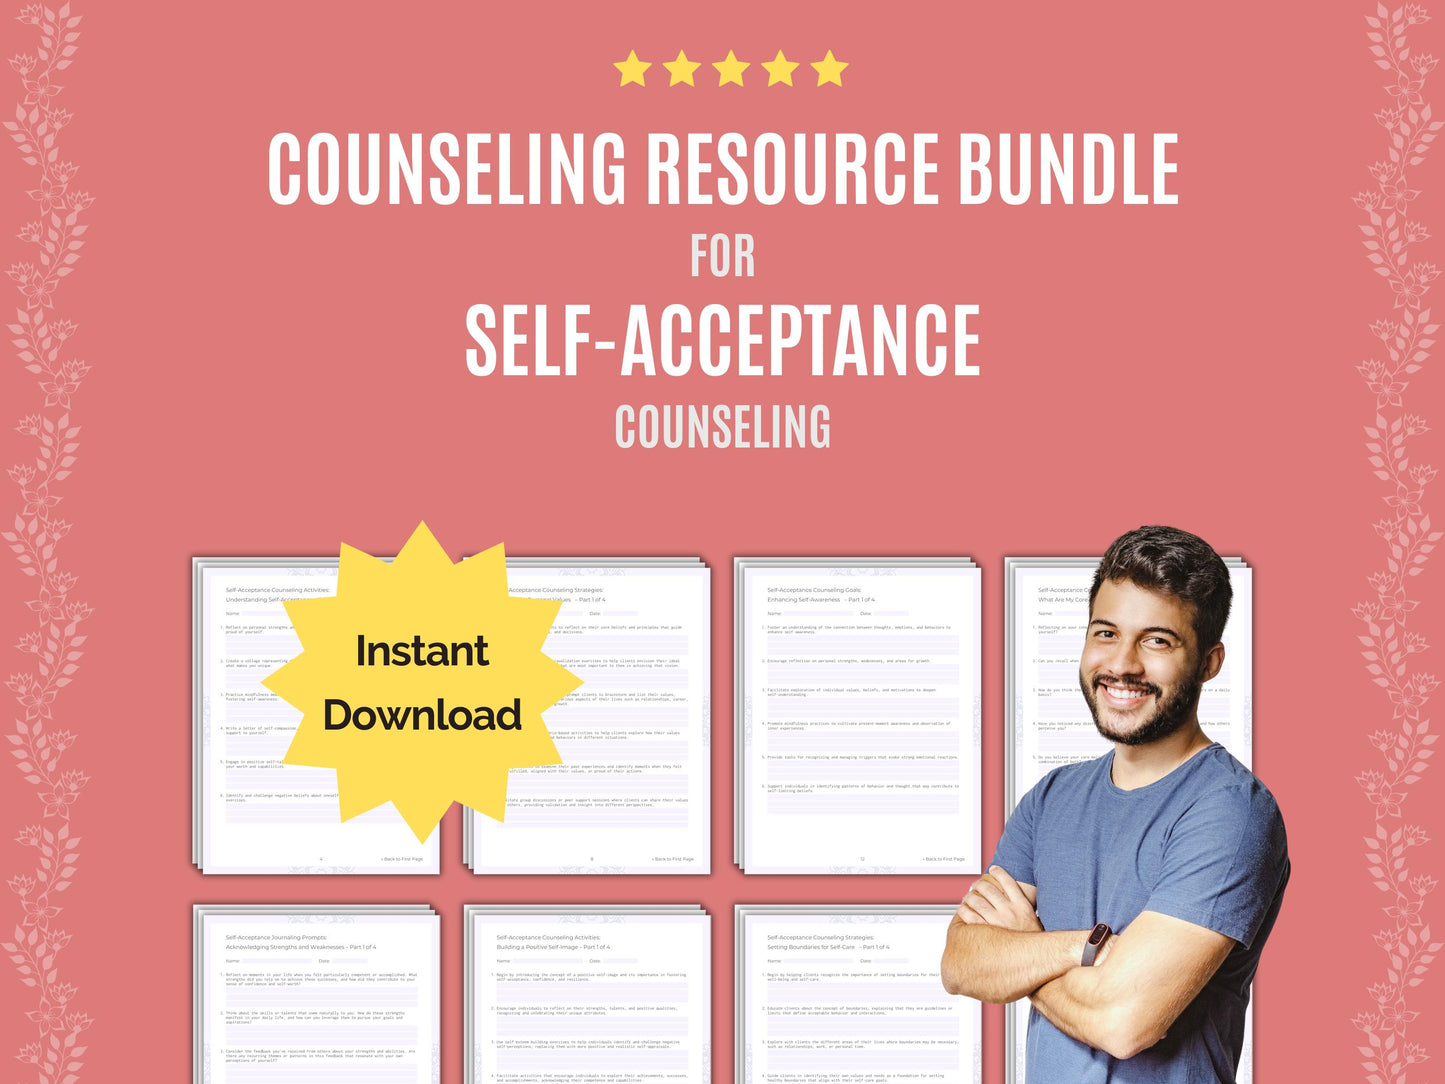 Self-Acceptance, Therapist, Counseling, Resource, Worksheet, Content, Therapy, Self-Acceptance Idea, Mental Health, Counselor, Self-Acceptance Tool, Template, Workbook